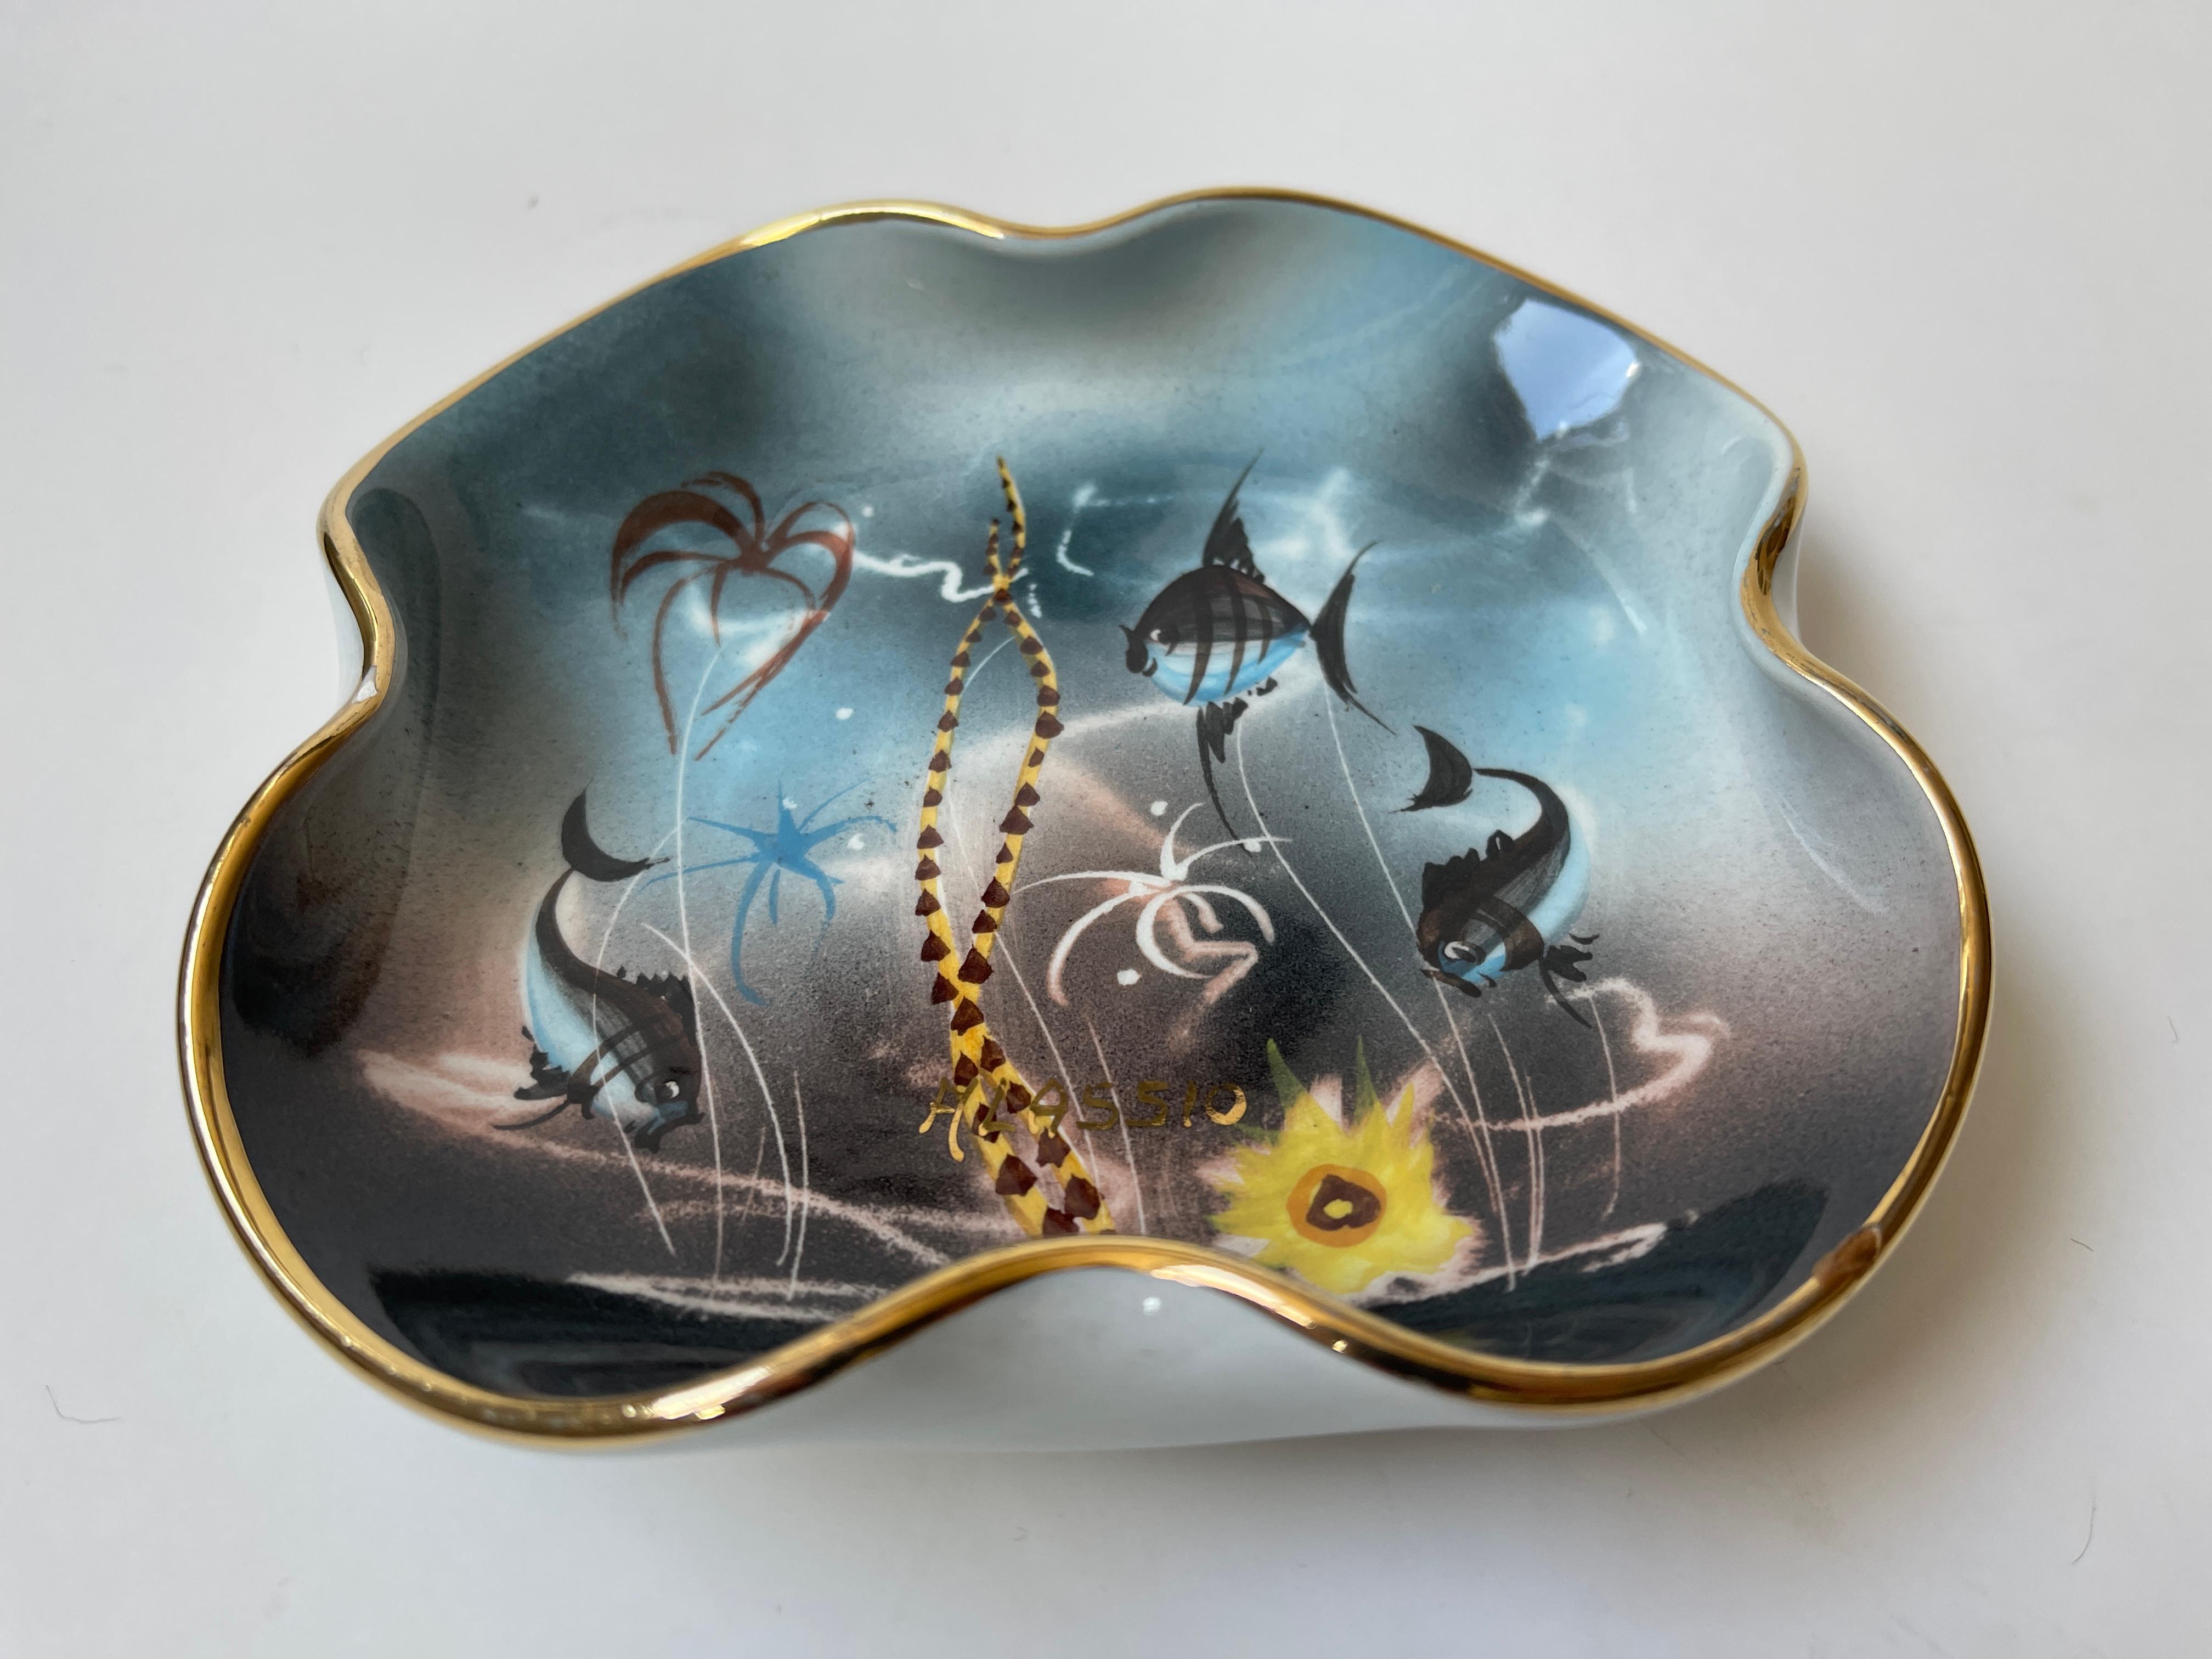 Amorphic 1960's ceramic vide-poche tray dish hand painted with aquatic scene from the Italian Riviera. Gilt rim surrounds the dish, signed ALASSIO.
Numbered on bottom  561 / 16.